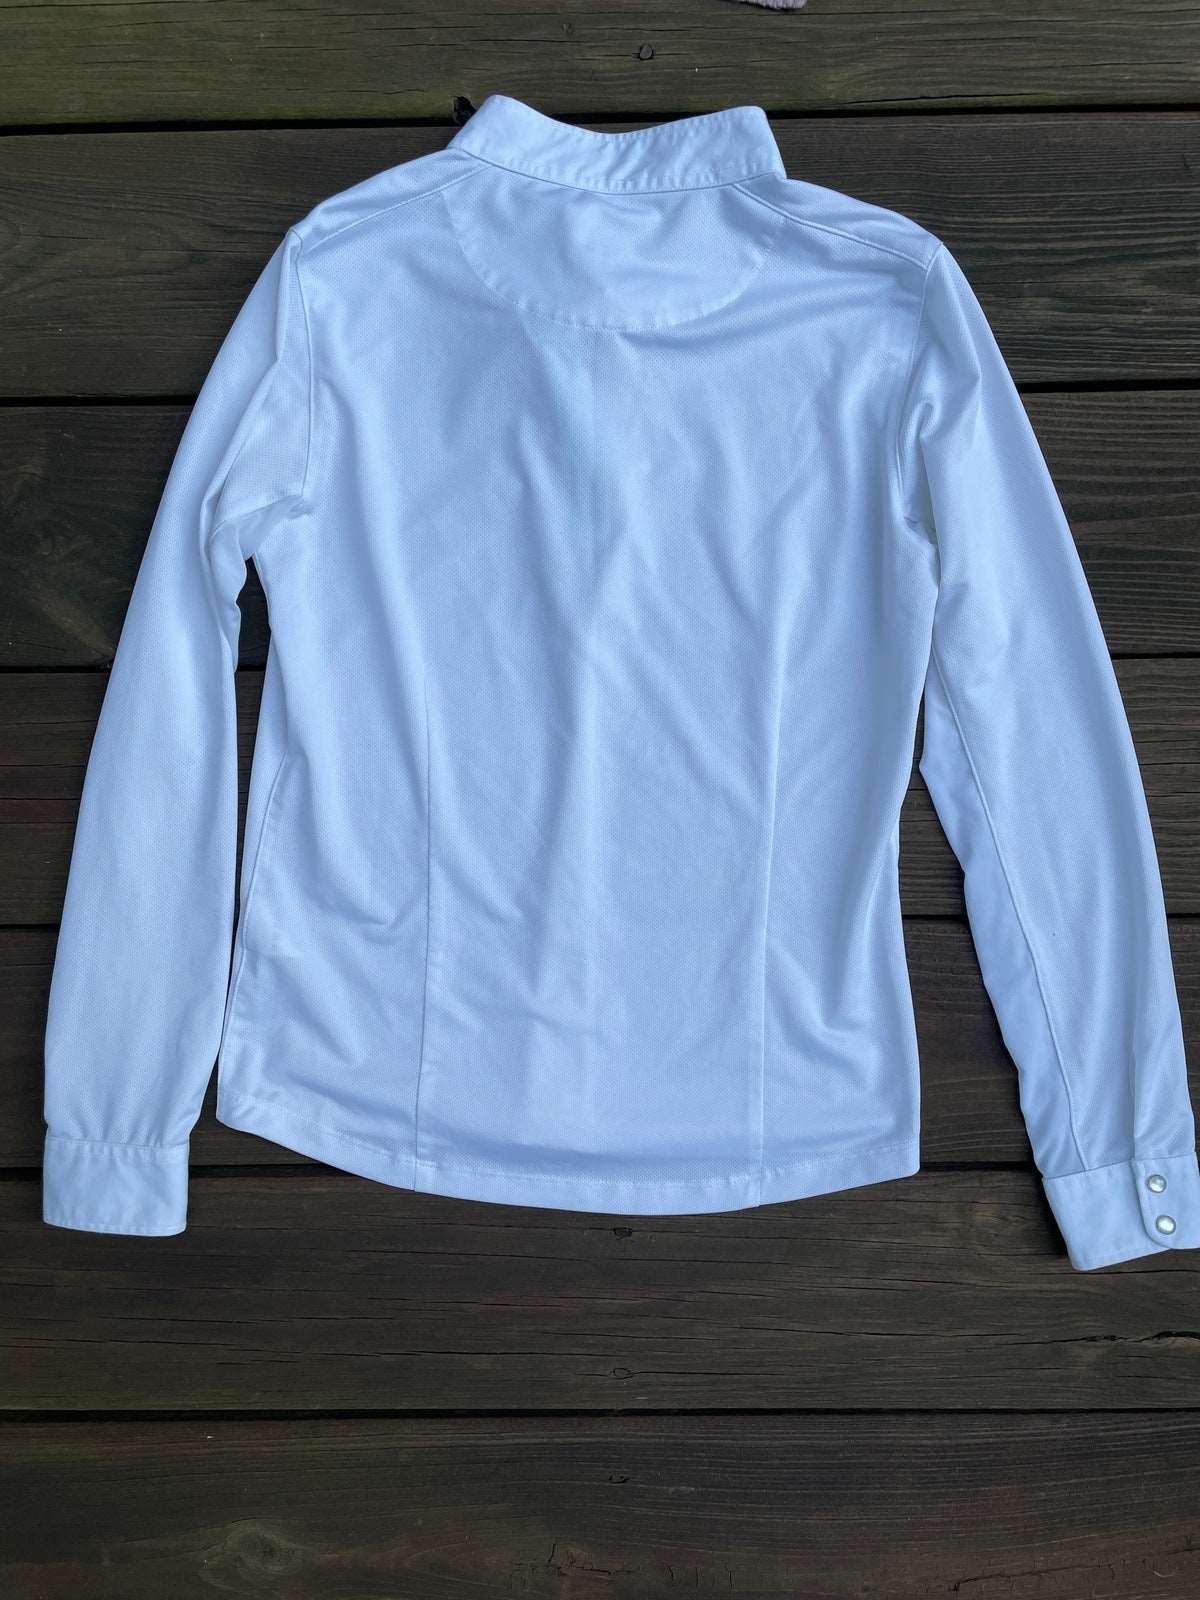 ThriftedEquestrian Clothing Youth XL Dover Saddlery Show Shirt - Youth XL